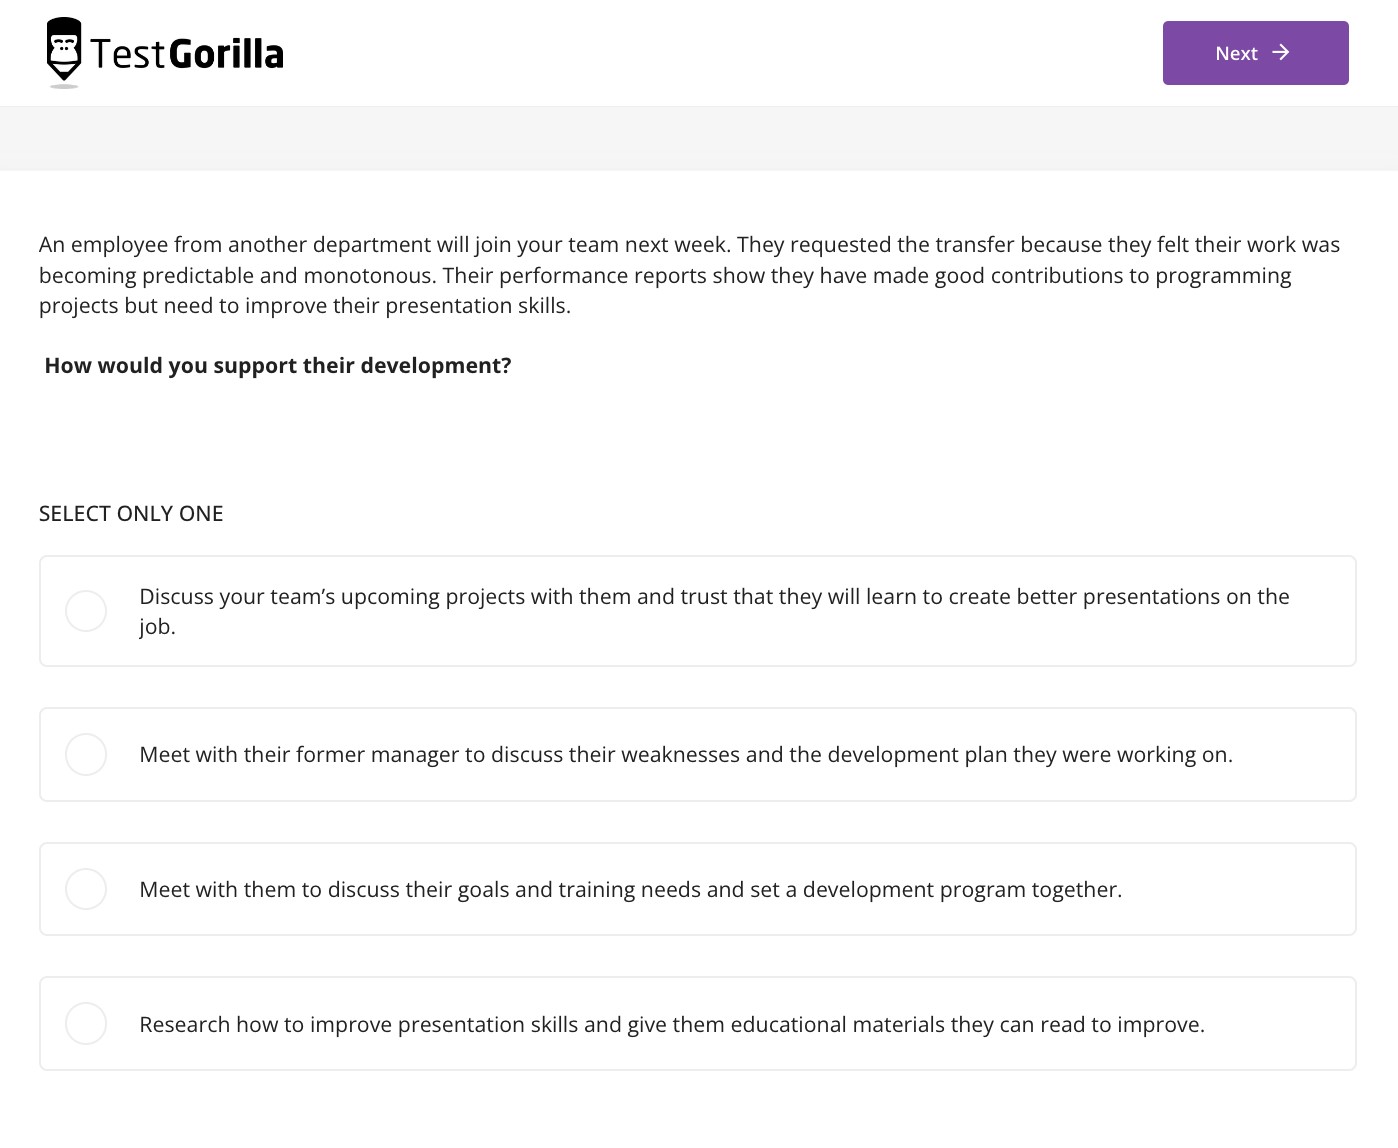 An example question from TestGorilla's Leadership and People Management test.